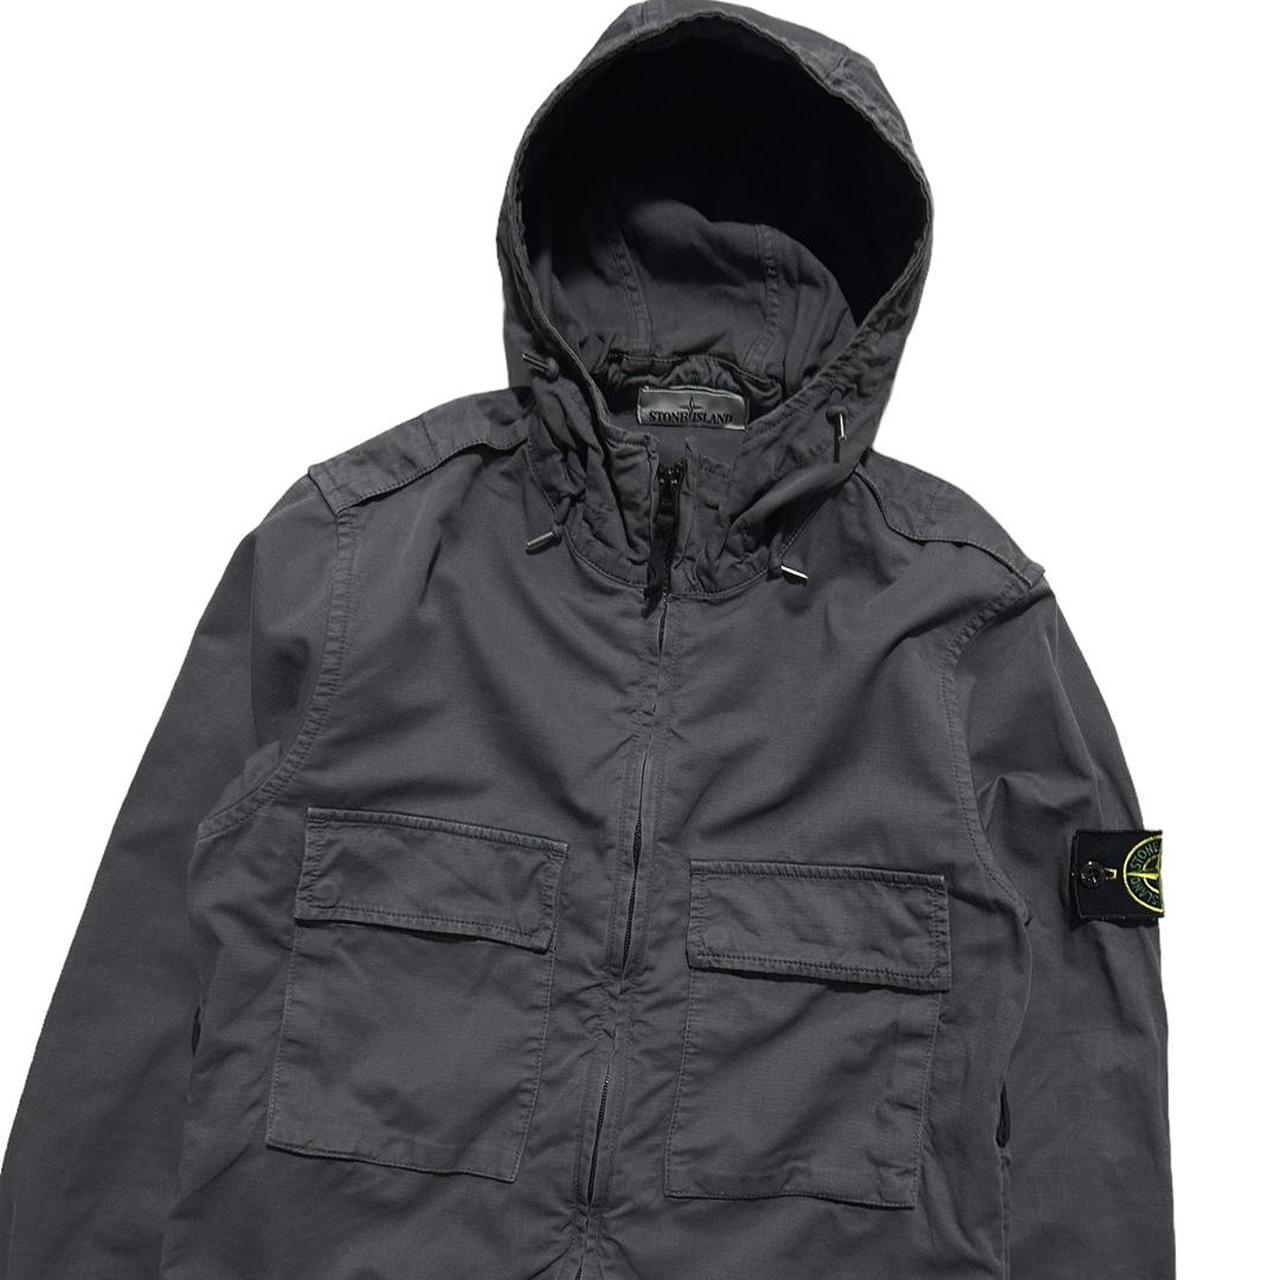 Stone Island Grey Canvas Hooded Jacket - Known Source